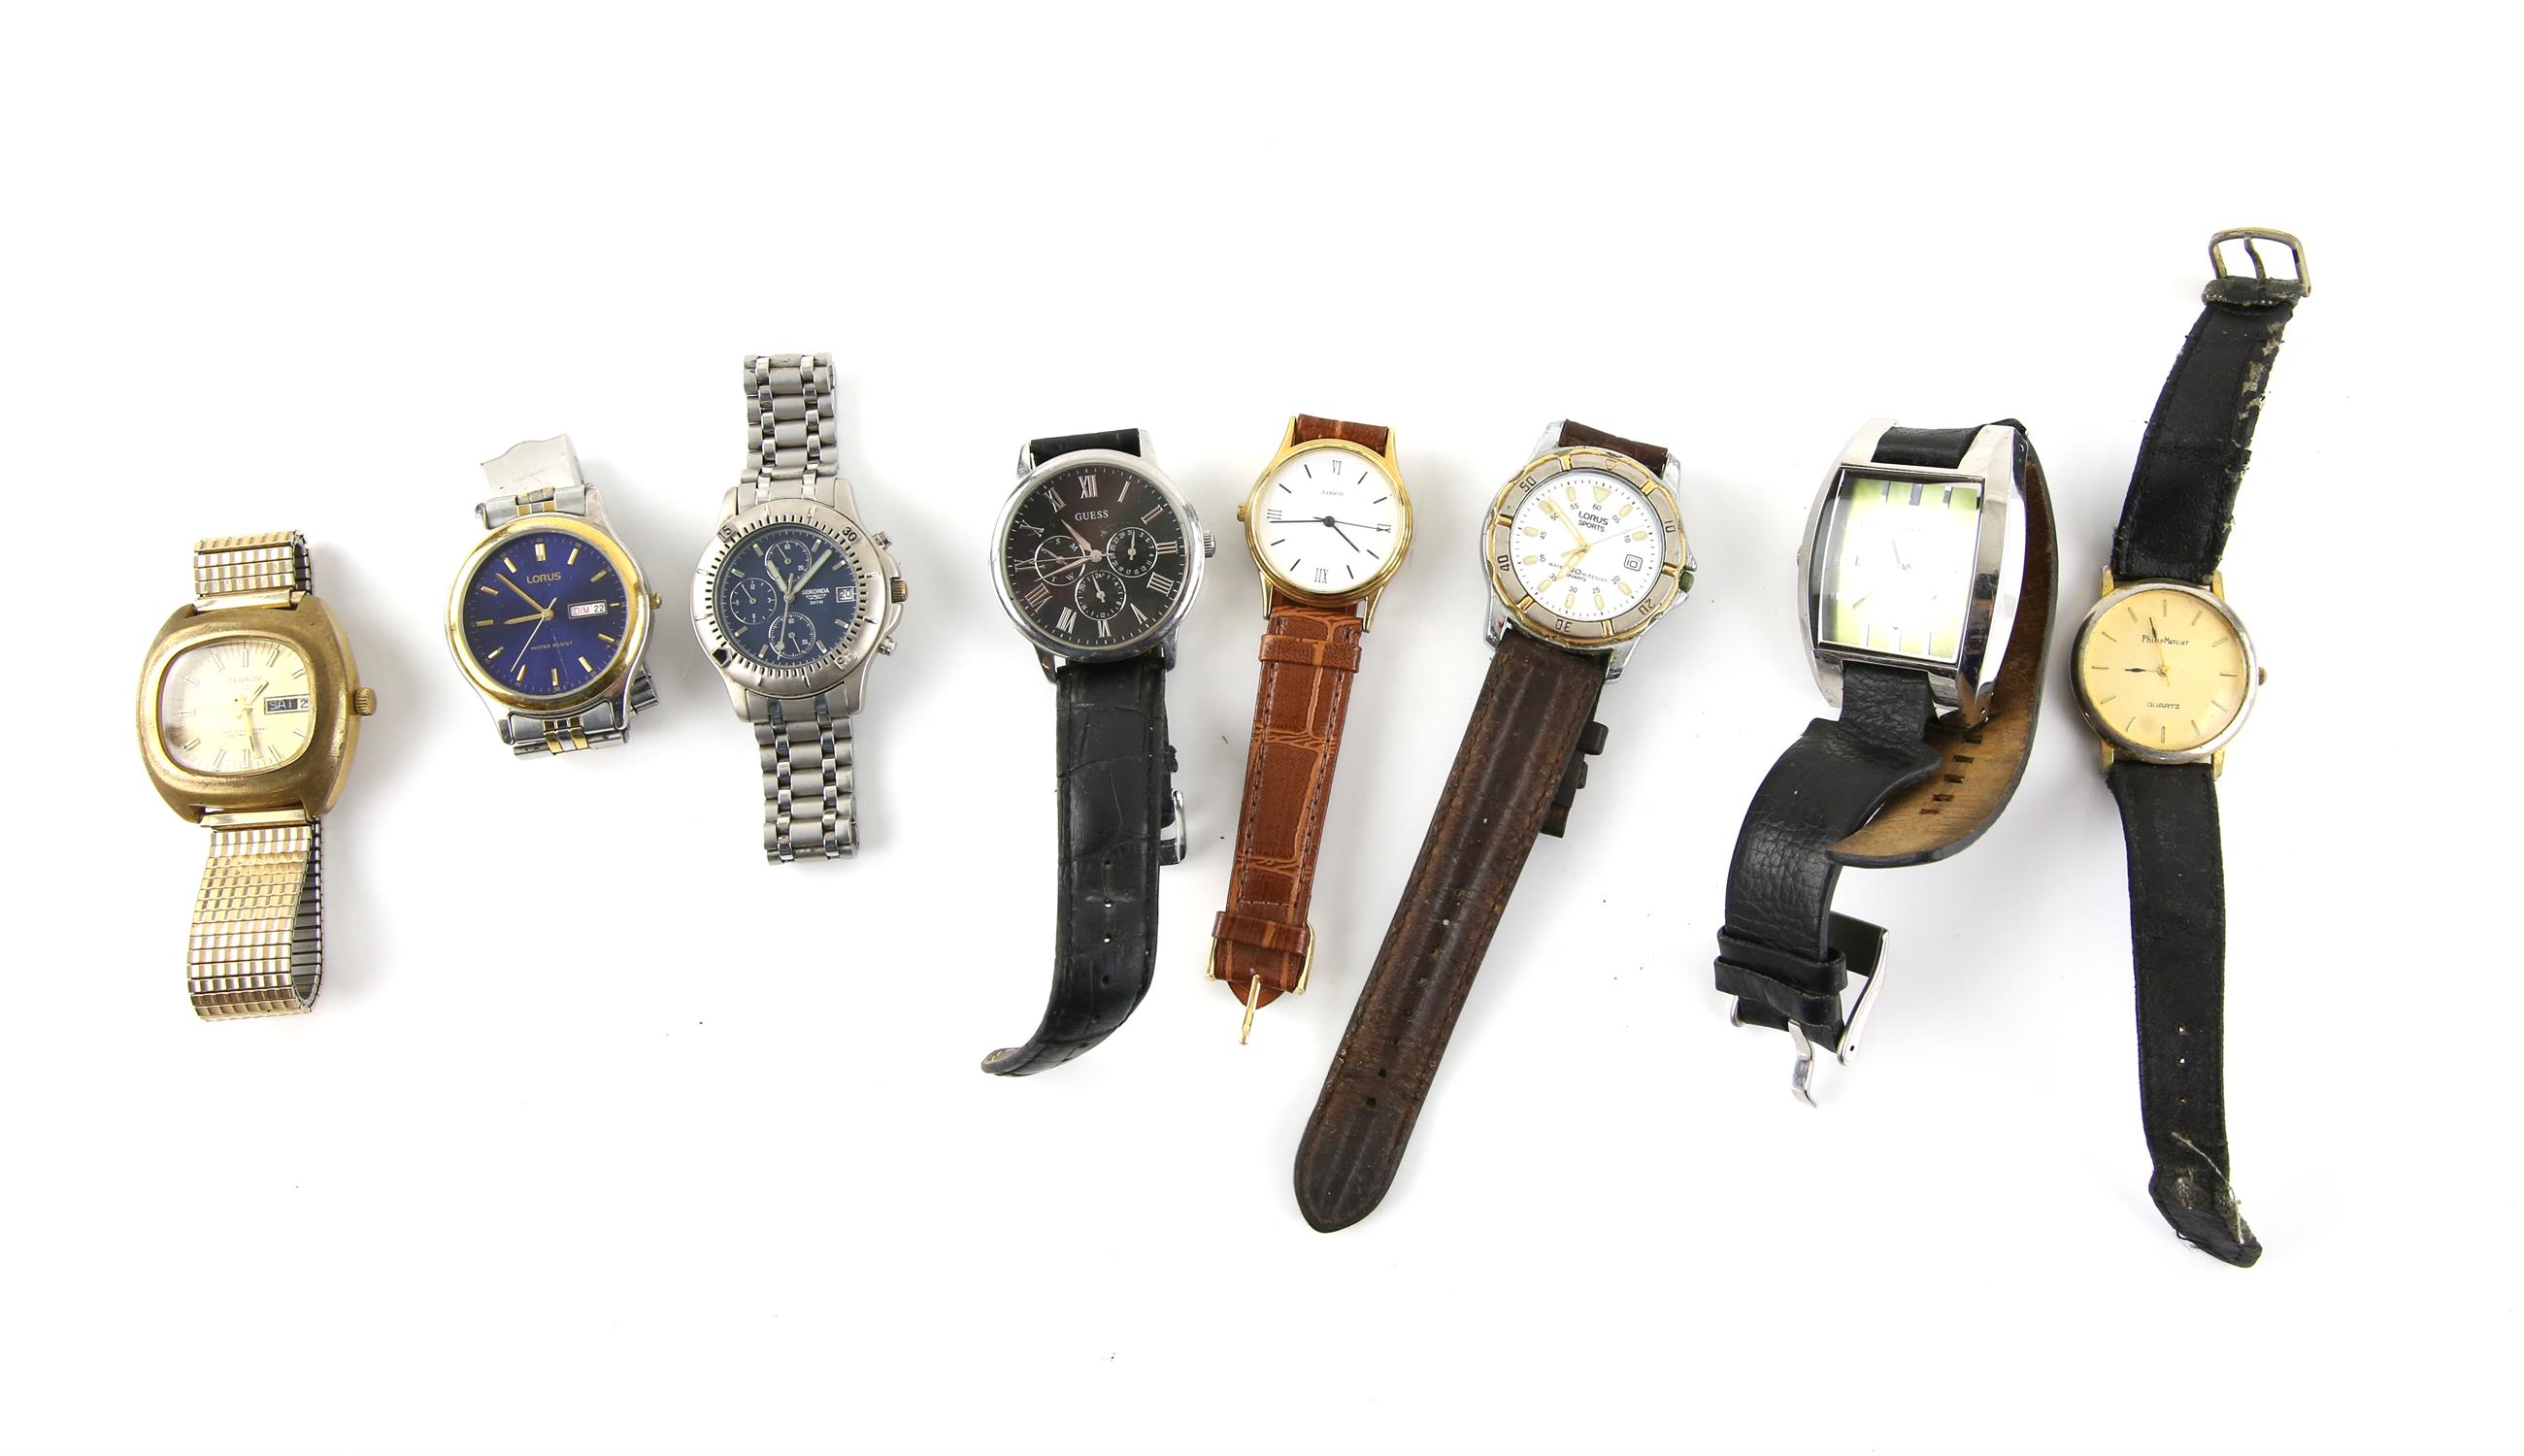 Tregrov 25 jewel automatic Swiss gents watch and a selection of other gents wristwatches